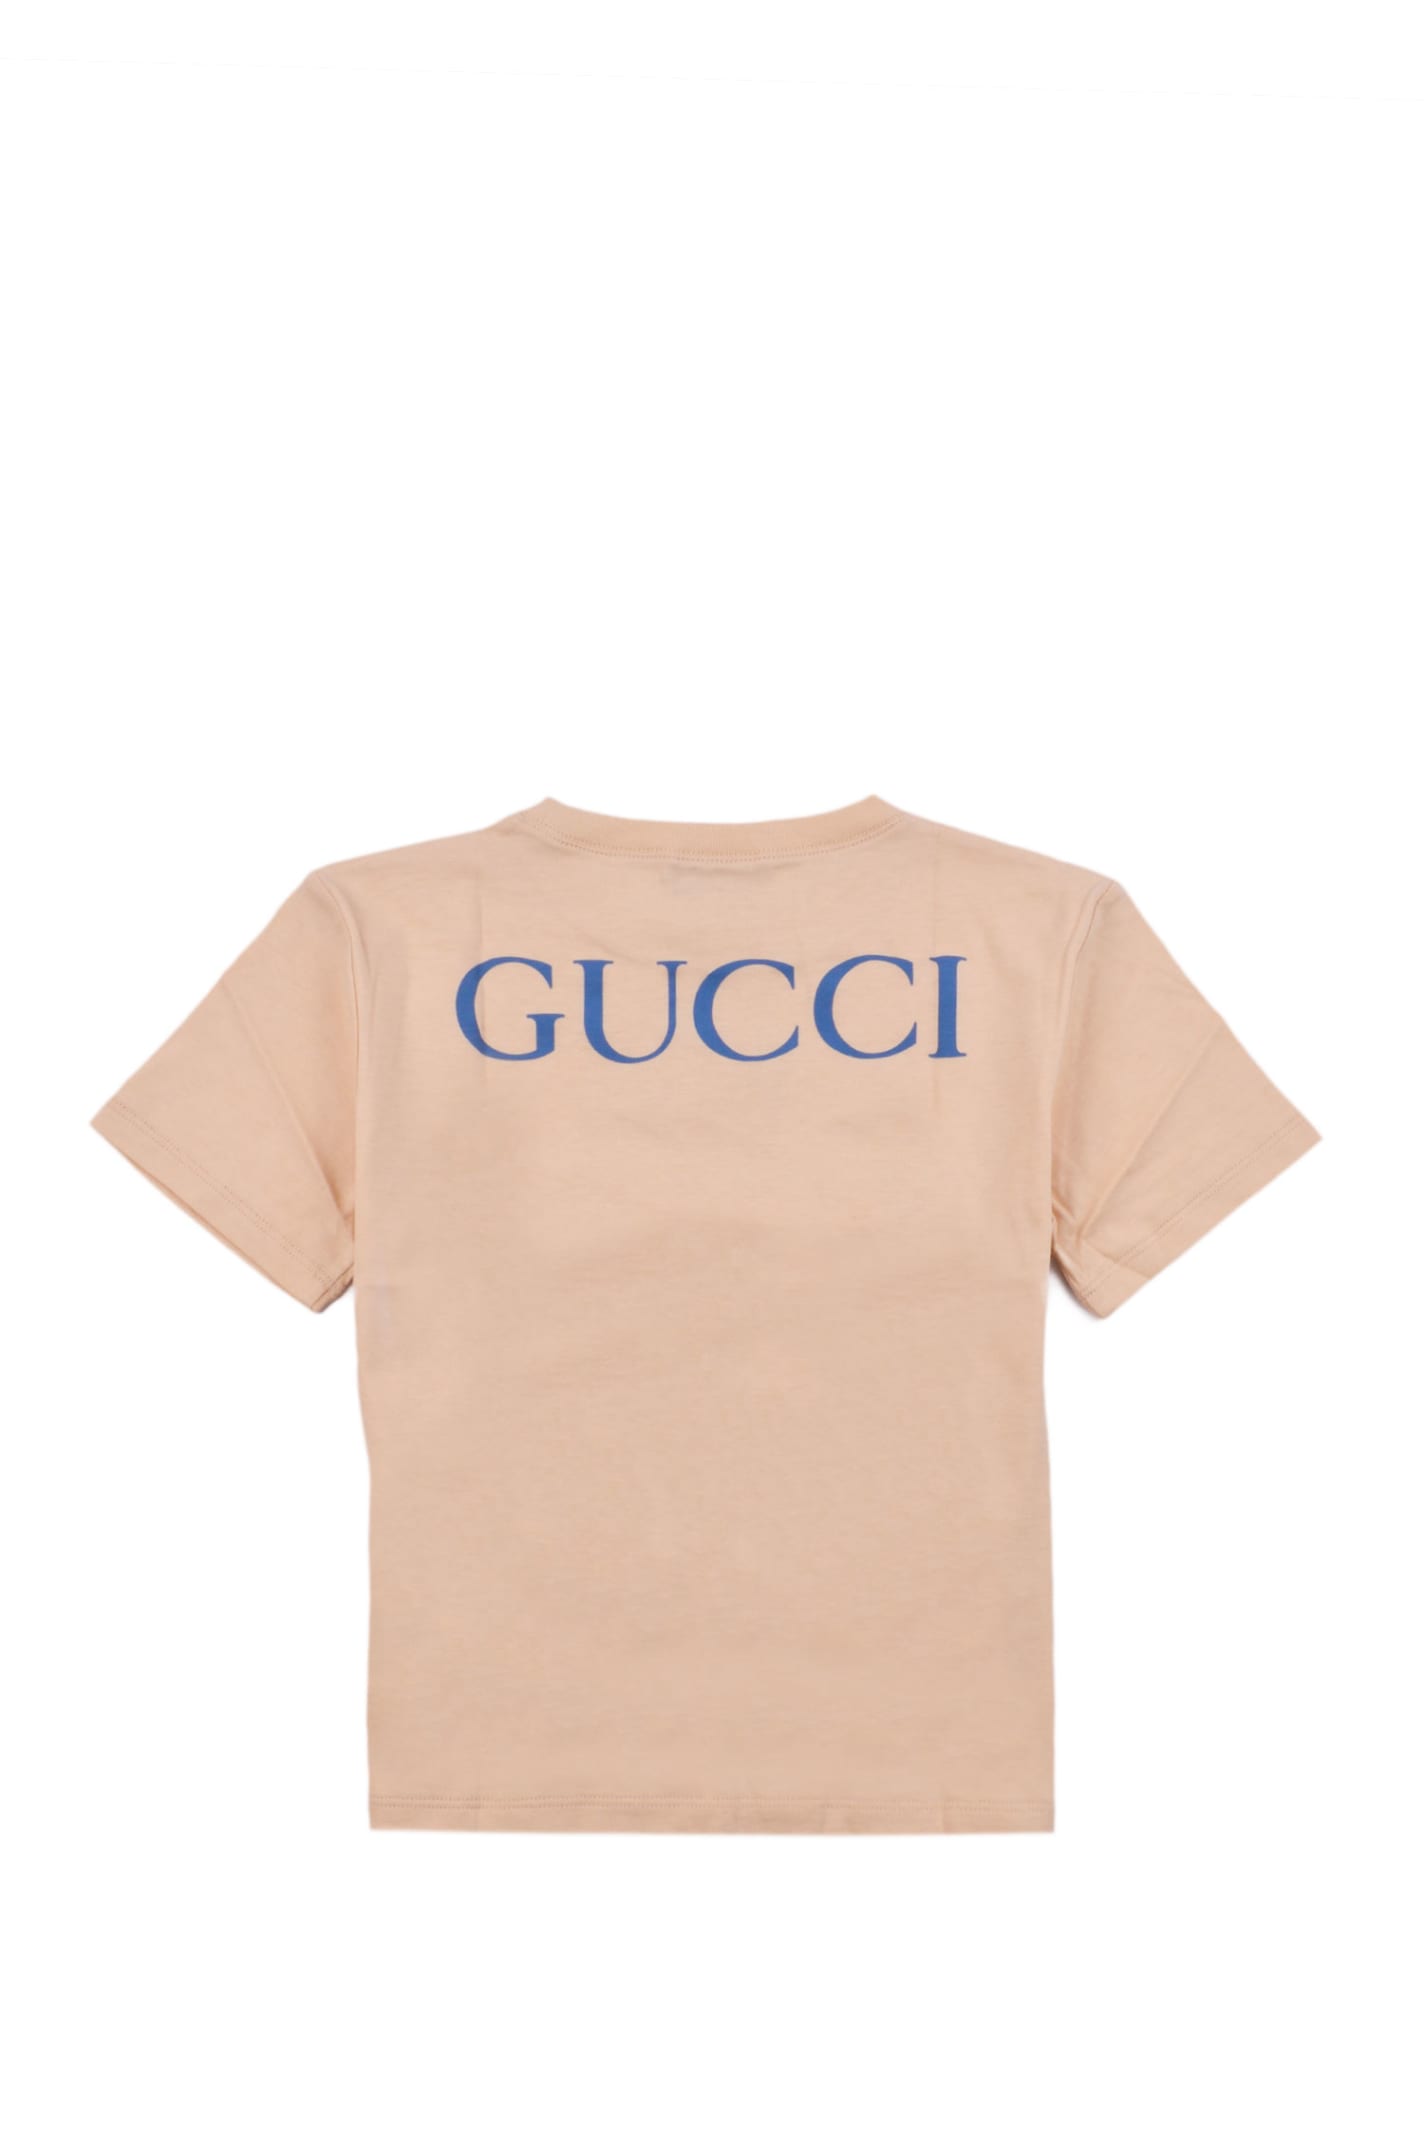 GUCCI COTTON T-SHIRT WITH PRINT 